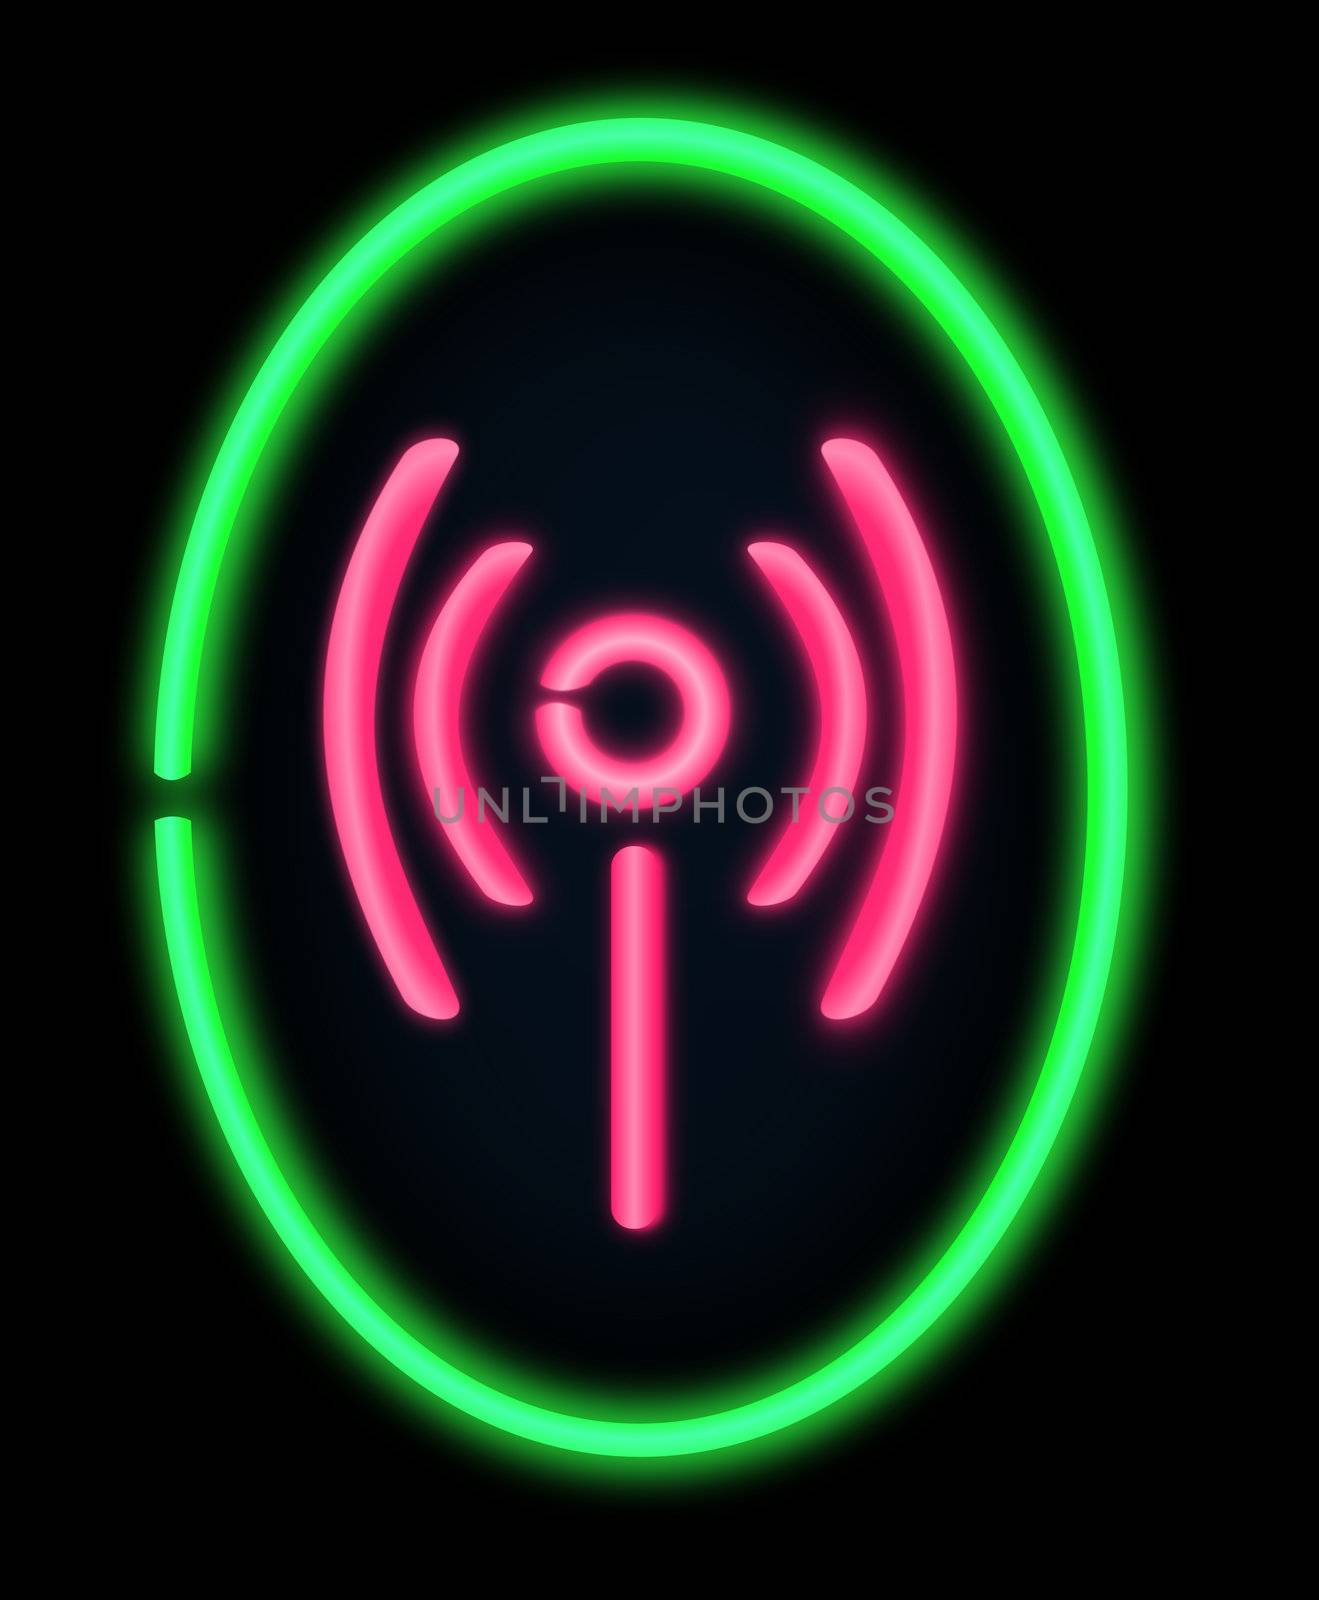 Illustration depicting a illuminated neon sign in the shape of a wireless symbol. Black background.